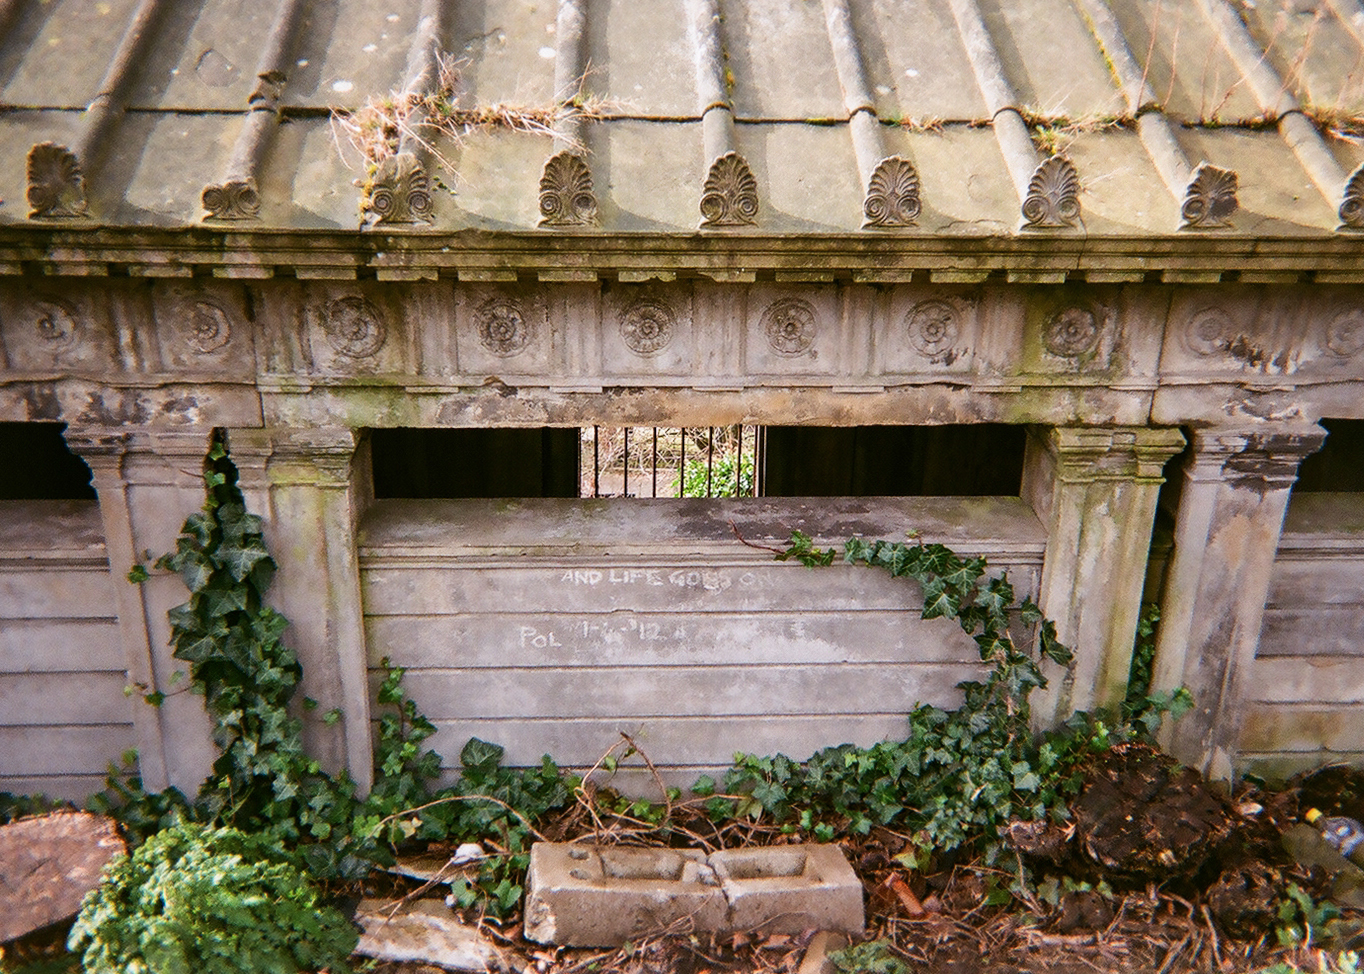 "And Life Goes On," Necropolis